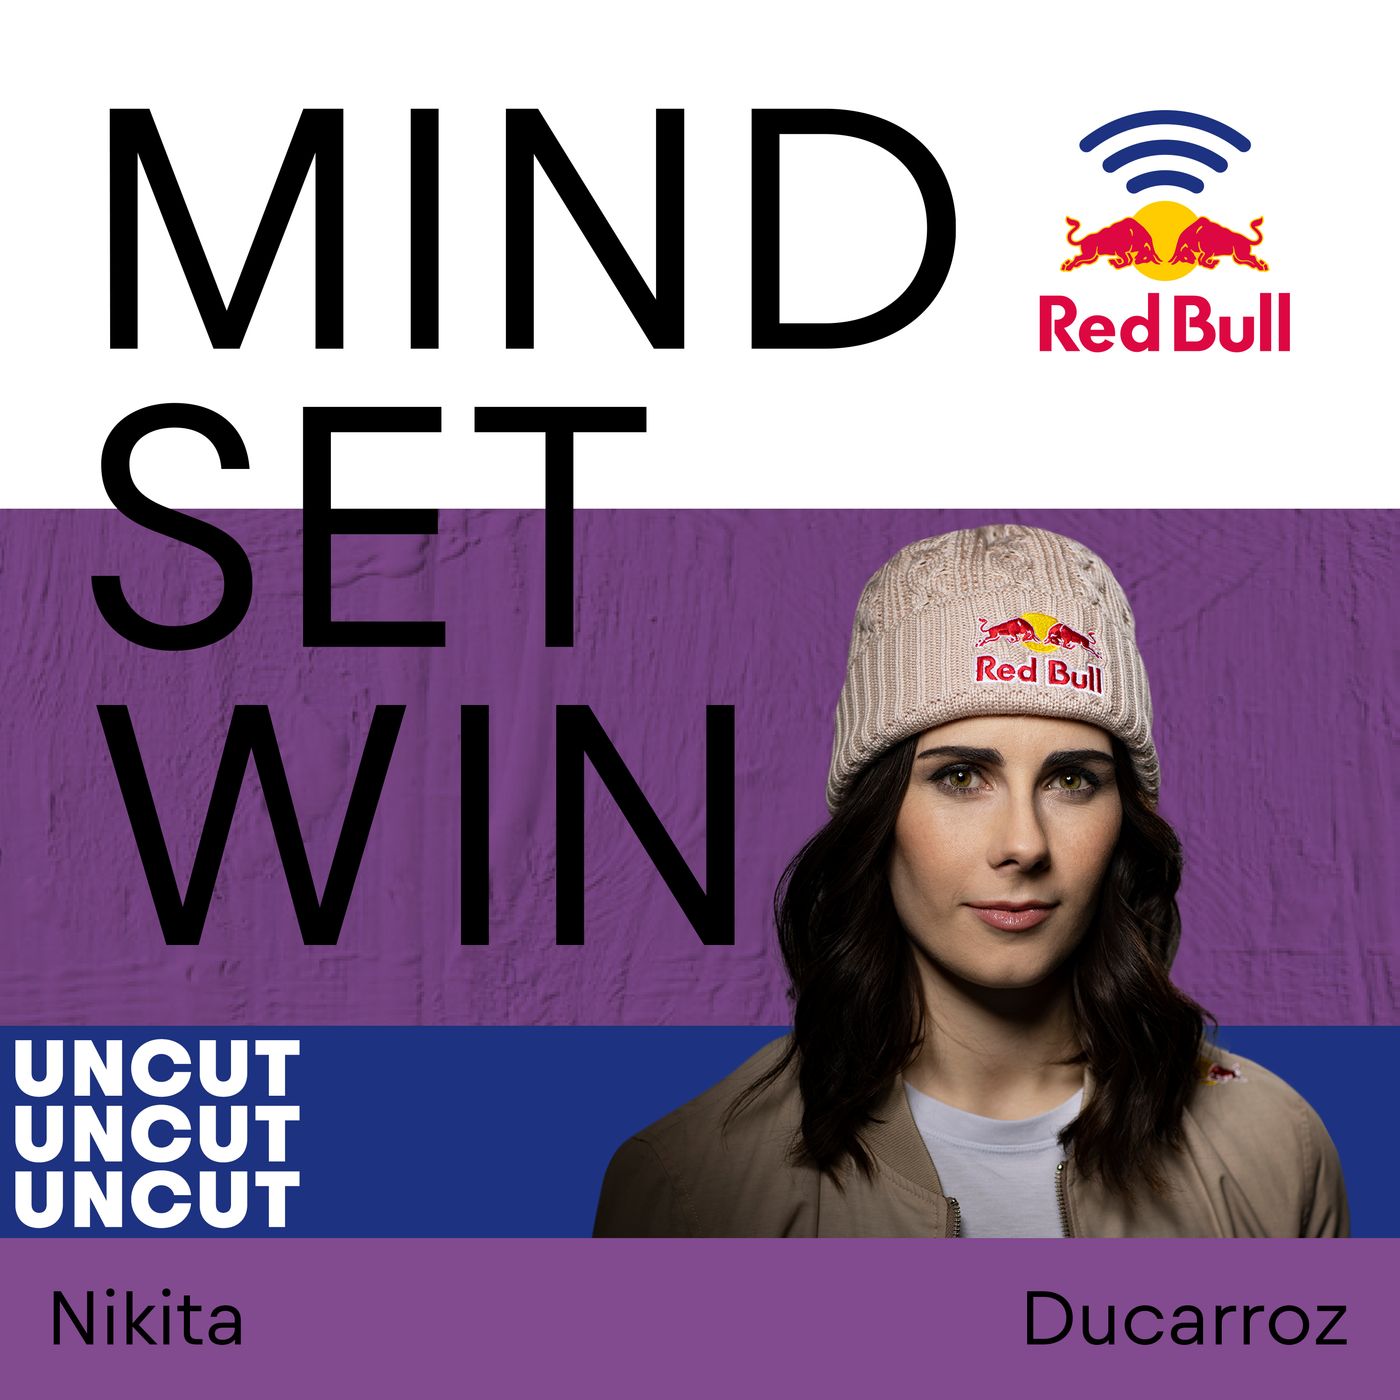 UNCUT: Full-length interview with Olympic Freestyle BMX athlete Nikita Ducarroz